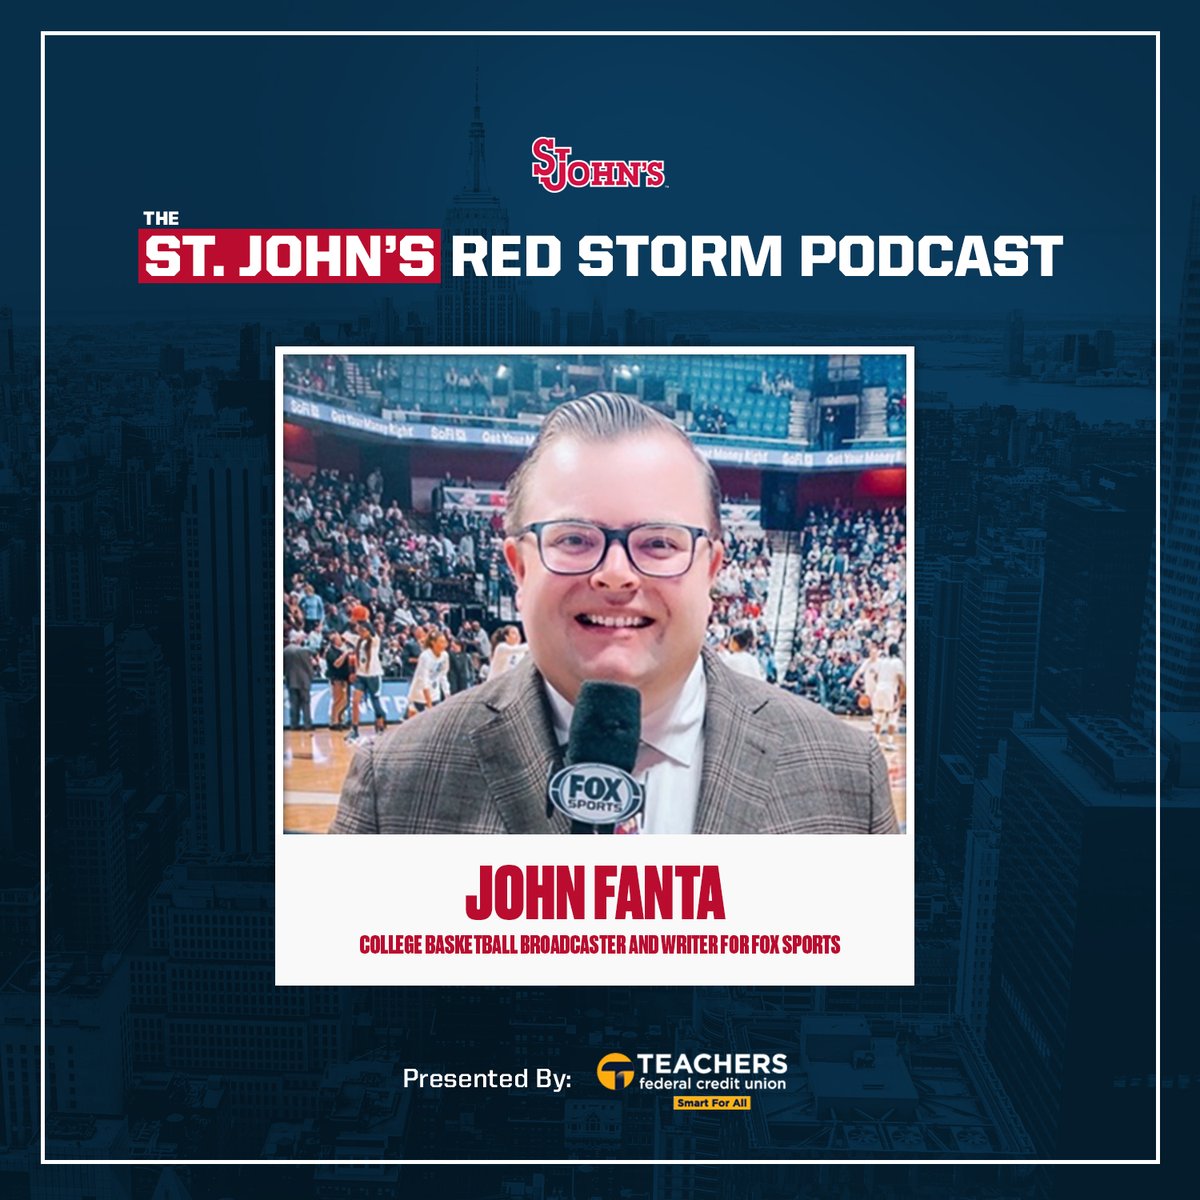 🚨NEW EPISODE OUT NOW🚨 Episode 6 features CBB on FOX’s @John_Fanta who joins the program to break down the first 11 games of the @StJohnsBBall season🏀 Listen ⤵️ Spotify- bit.ly/4aHSYZs iHeart Radio- bit.ly/4aA5OZt Apple Podcasts- bit.ly/41wyxKM